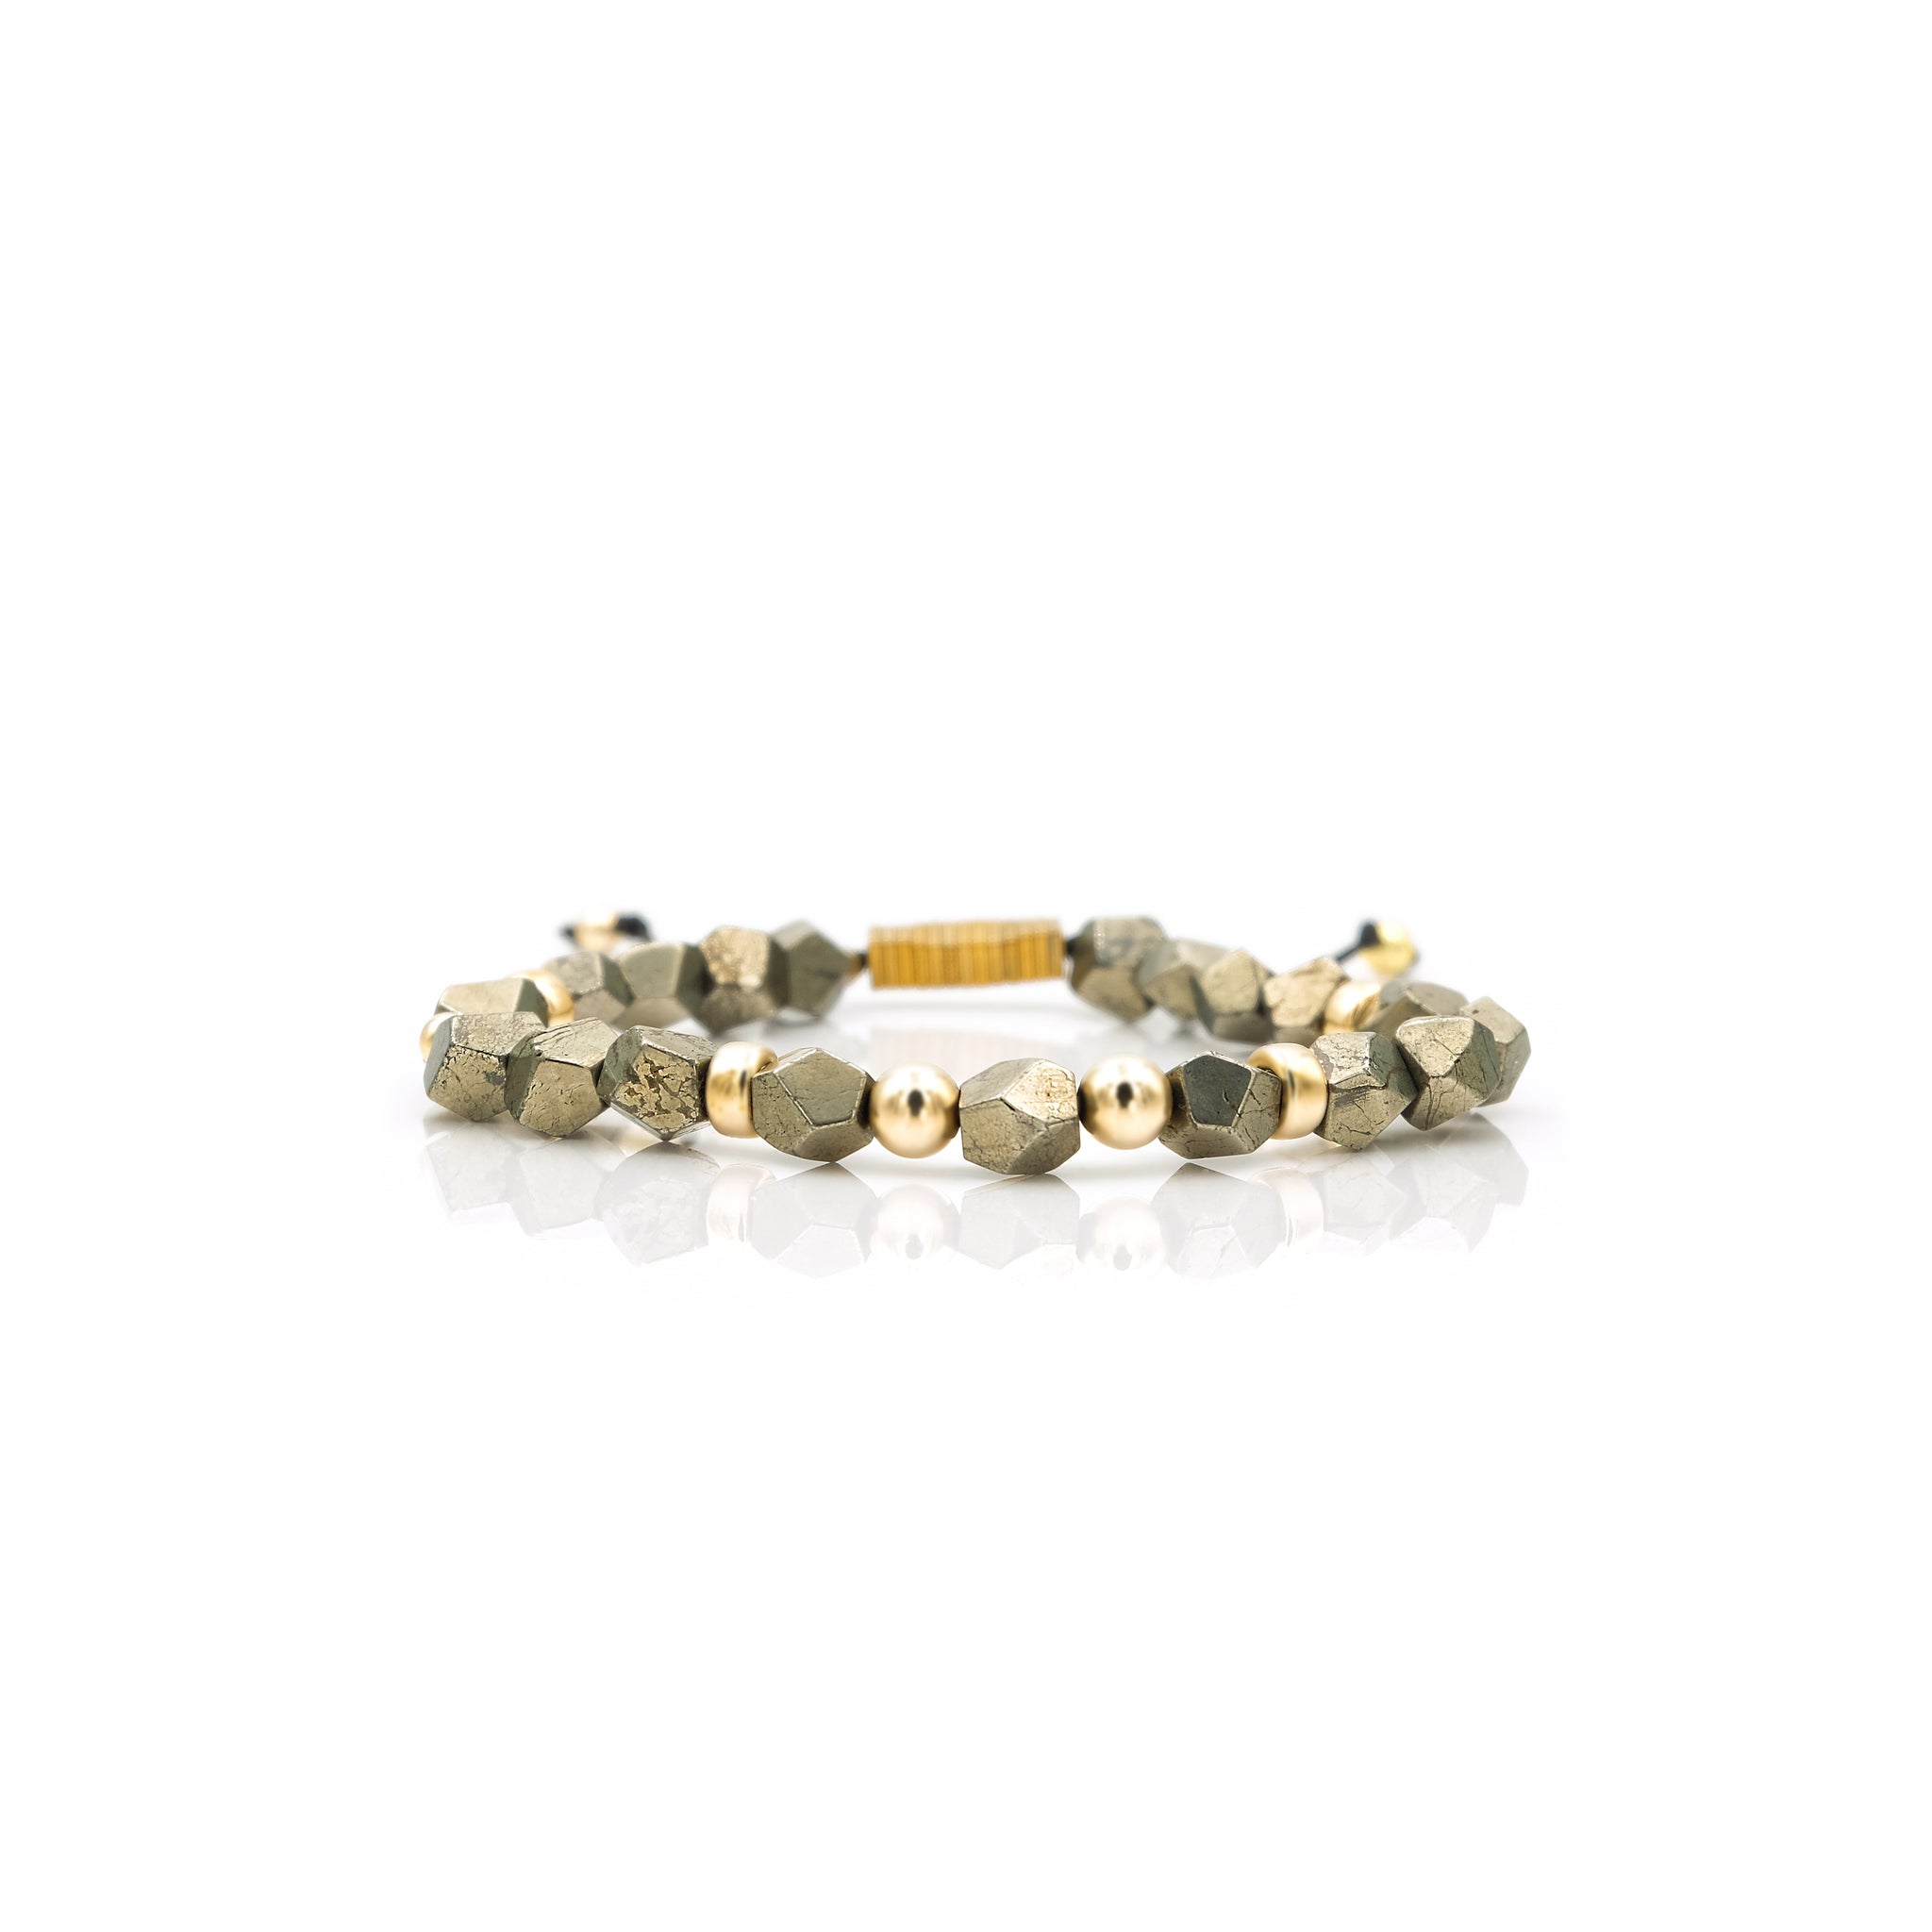 Handcrafted designer stone jewelry pyrite bracelet with a cause - Popvibe